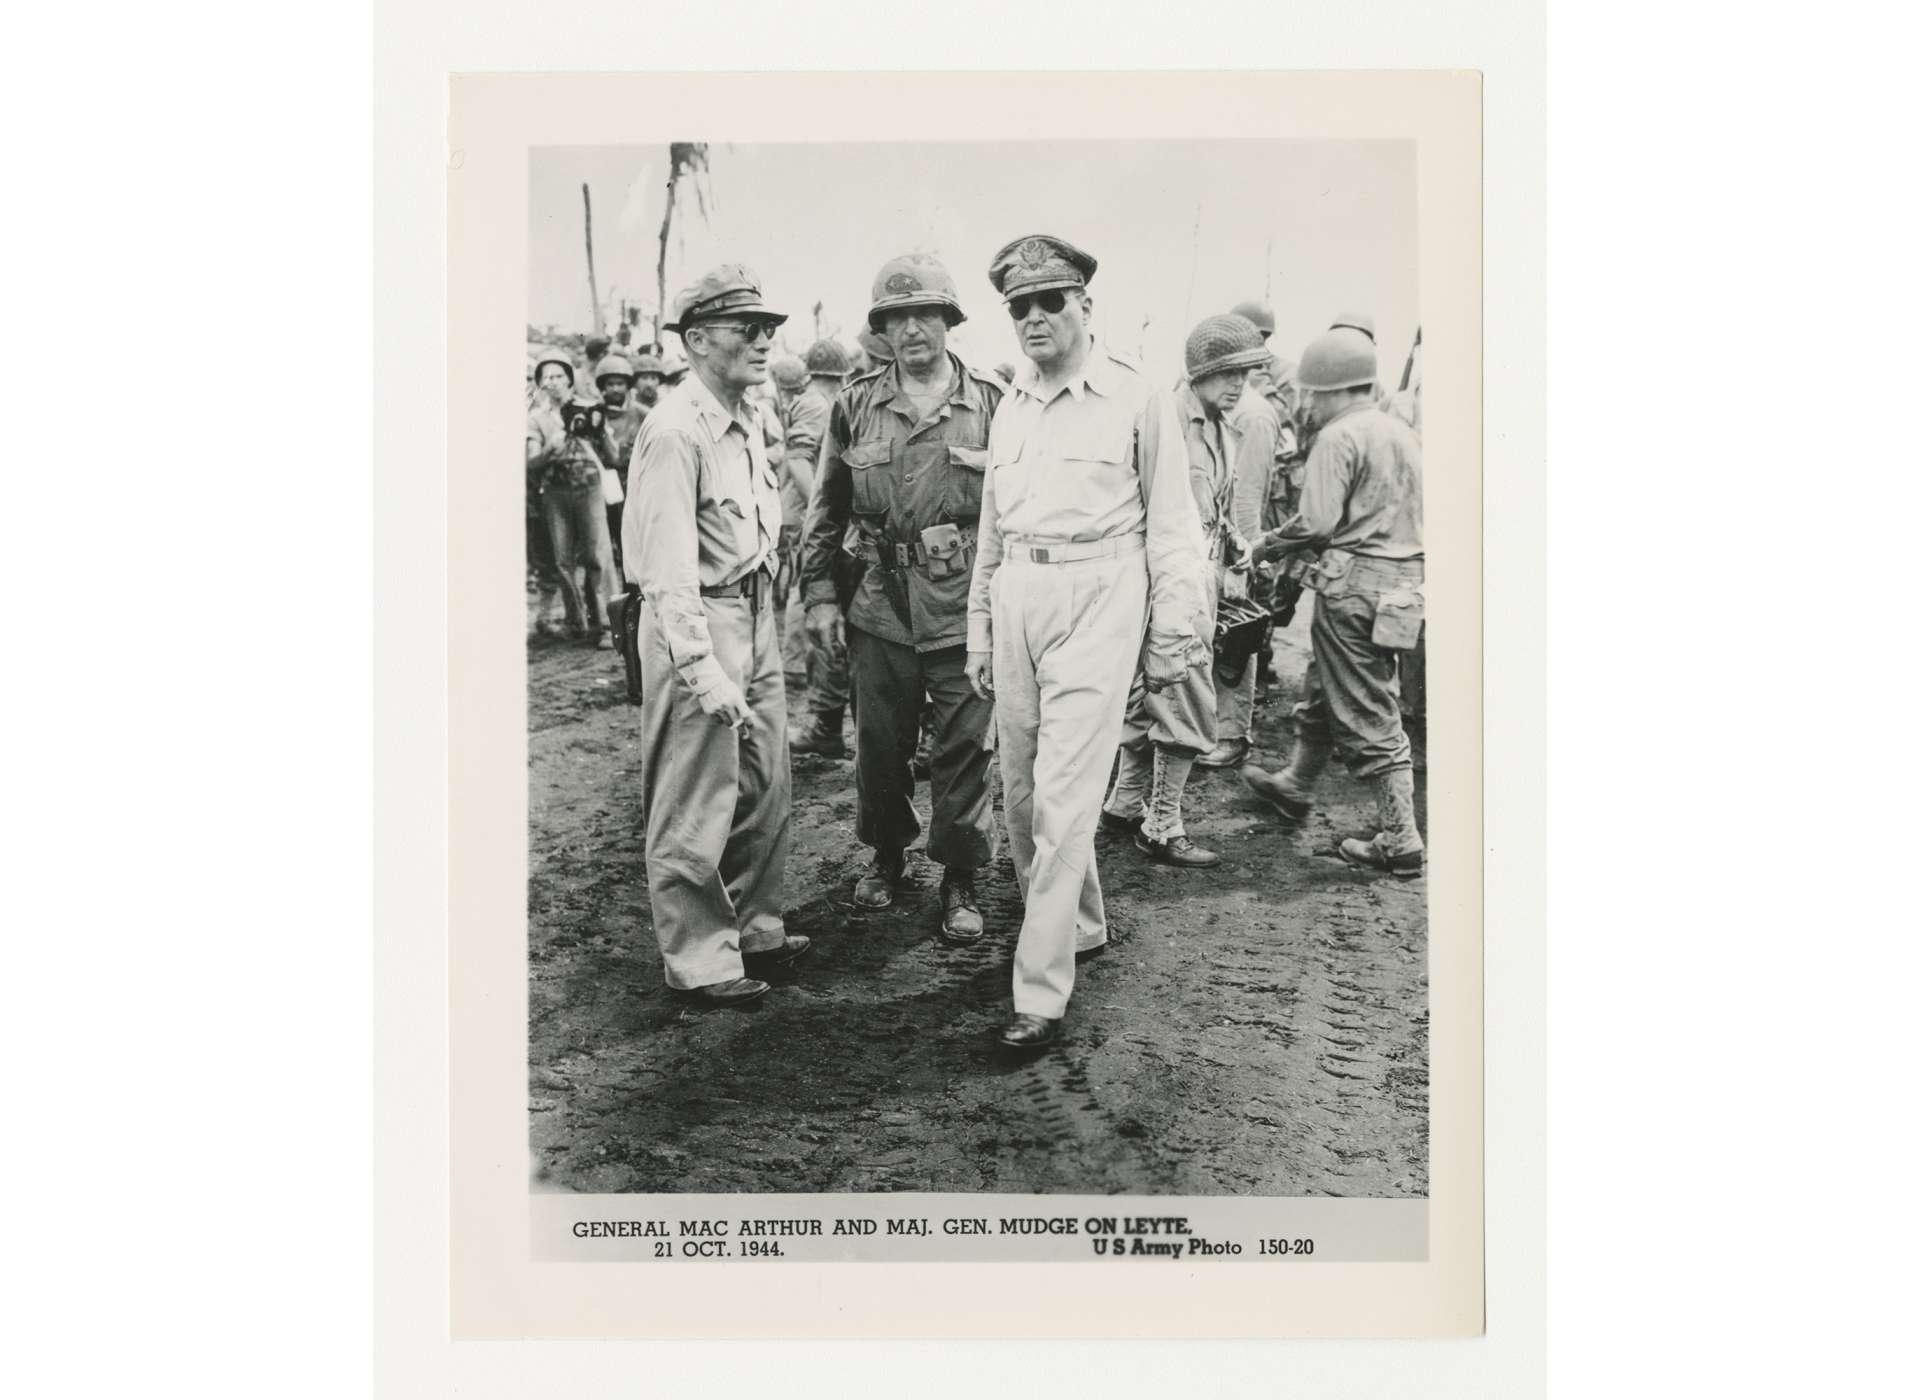 General Douglas MacArthur (right) conferring with Major General Verne C. Mudge (center), commanding general of the 1st Cavalry Division during the earlier Leyte campaign. On January 31, 1945, as the Cabanatuan raid was underway, MacArthur ordered Mudge to send his troopers to Manila and free the internees at Santo Tomas. US Army Photo, Gift of Lyle Eberspecher, from the Collection of The National World War II Museum, 2013.495.938.